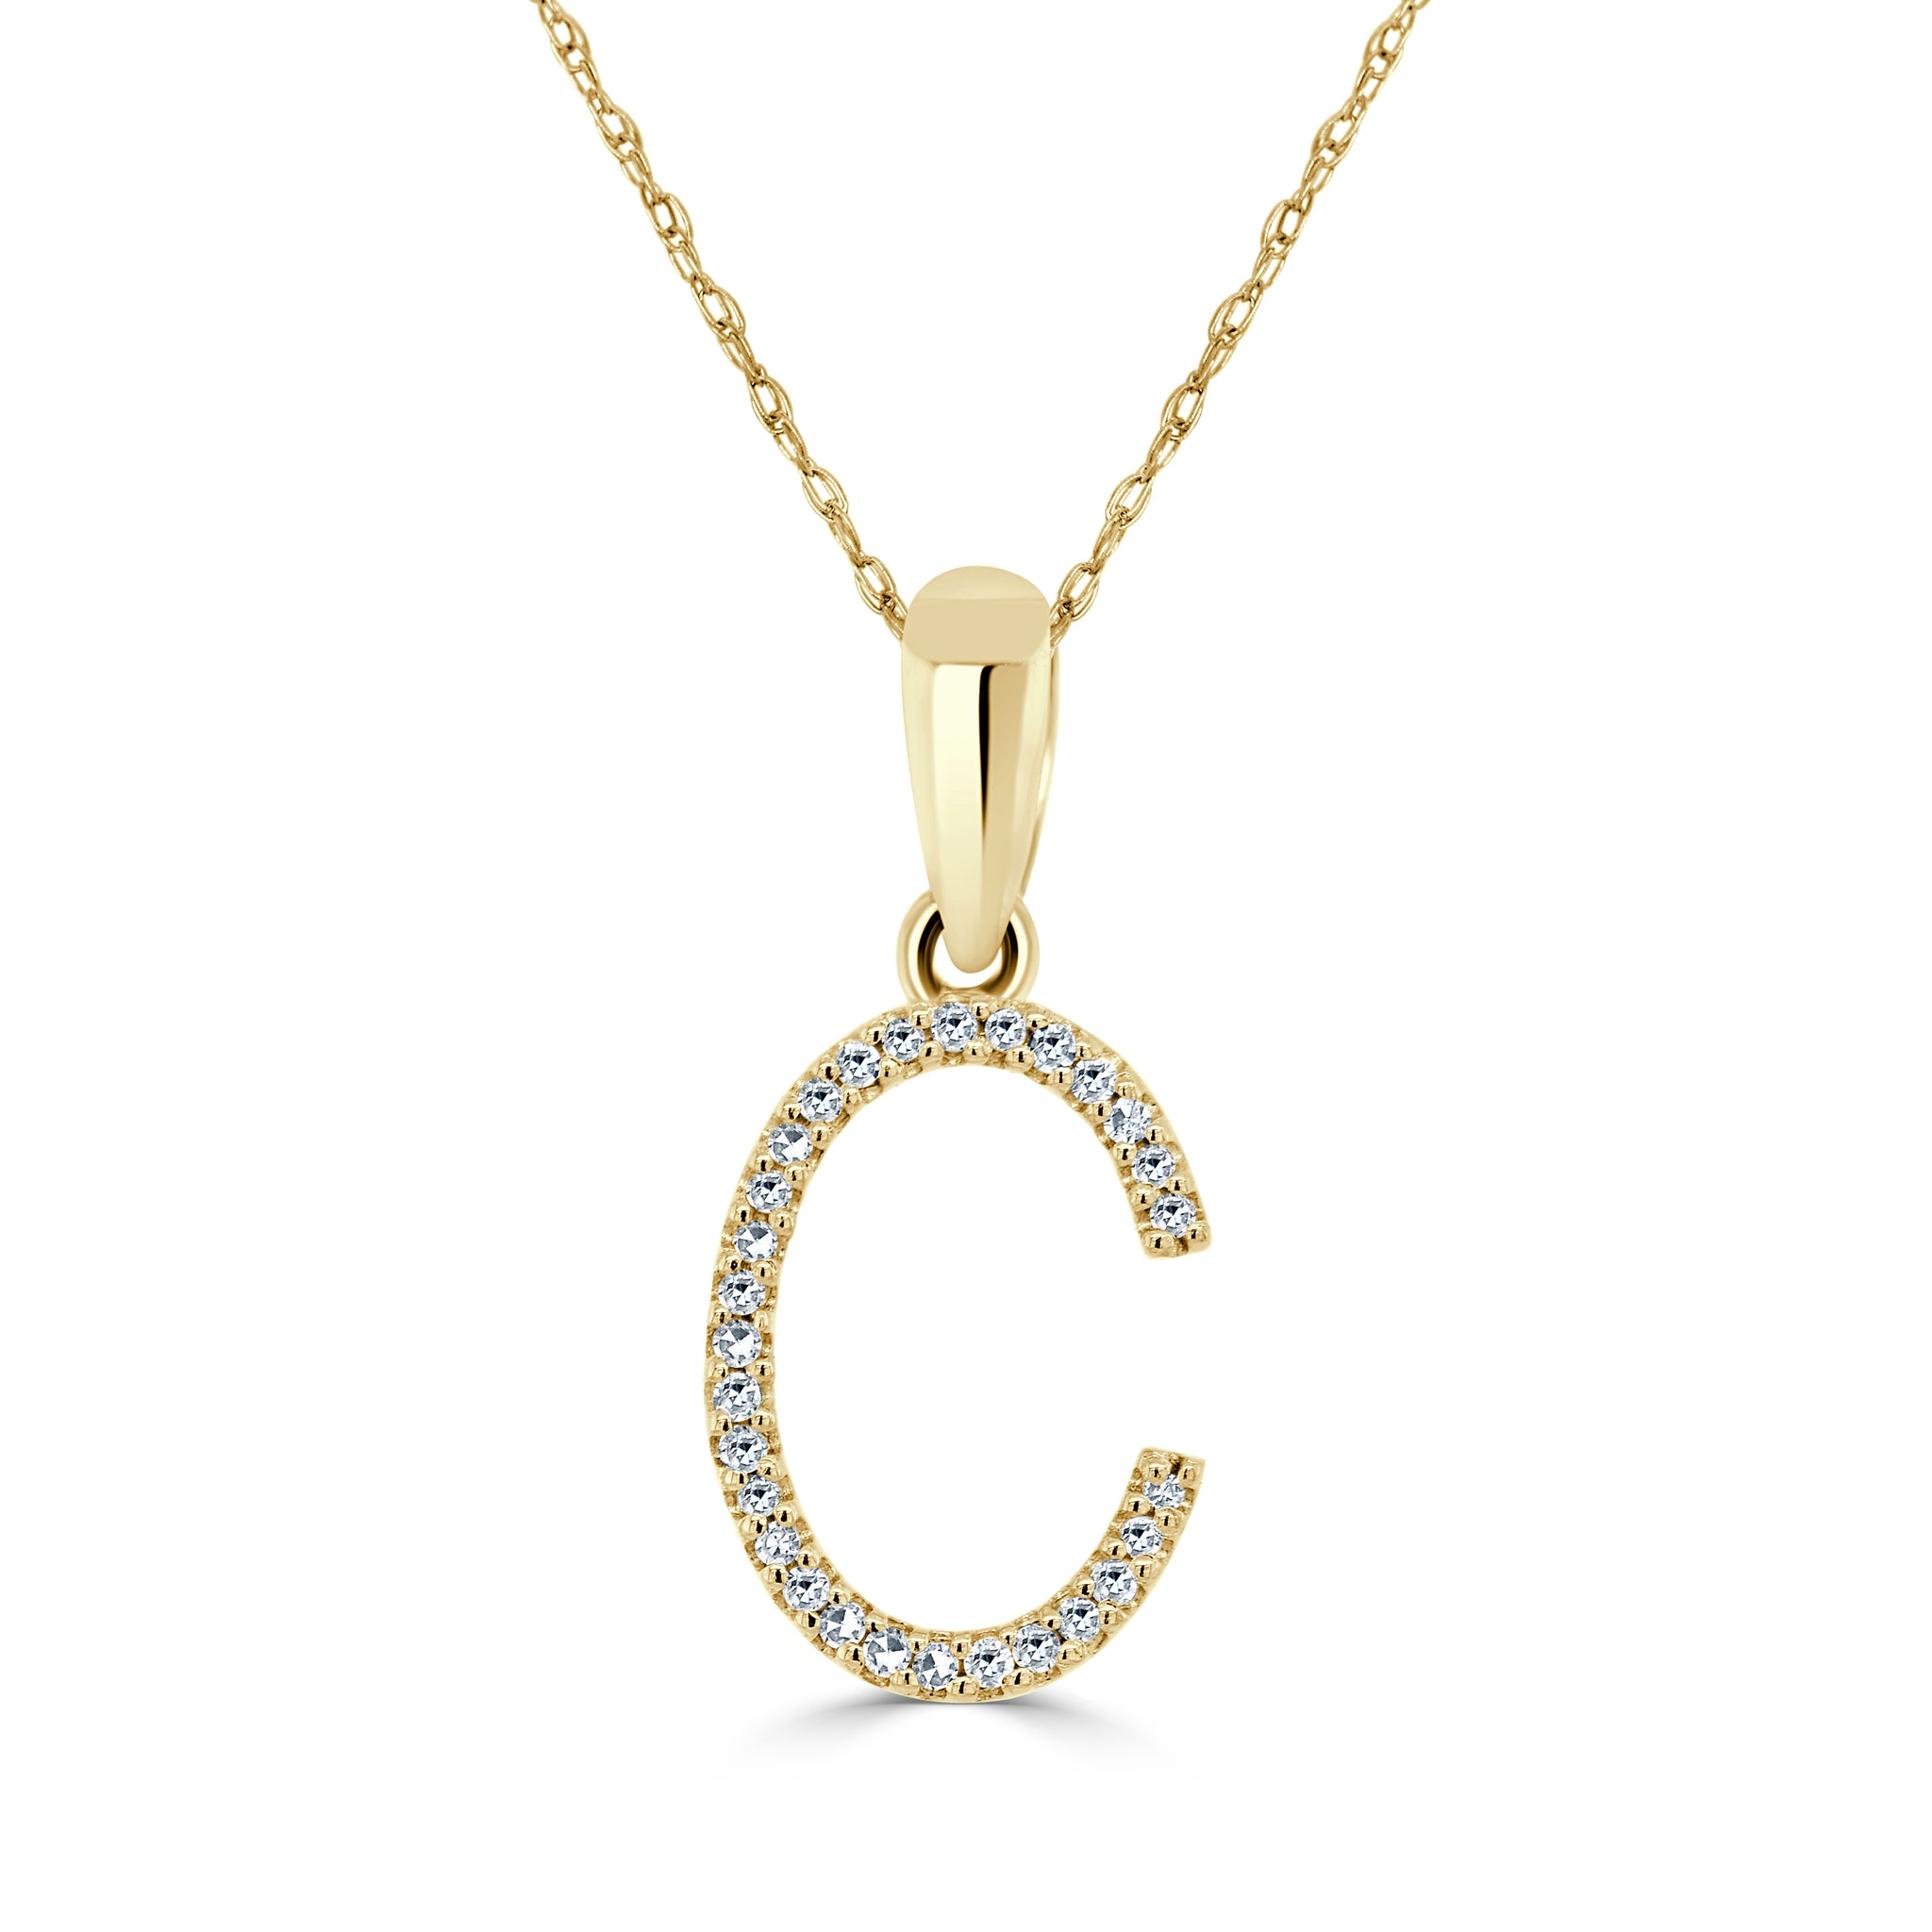 9ct Yellow Gold 'M' Letter Necklace